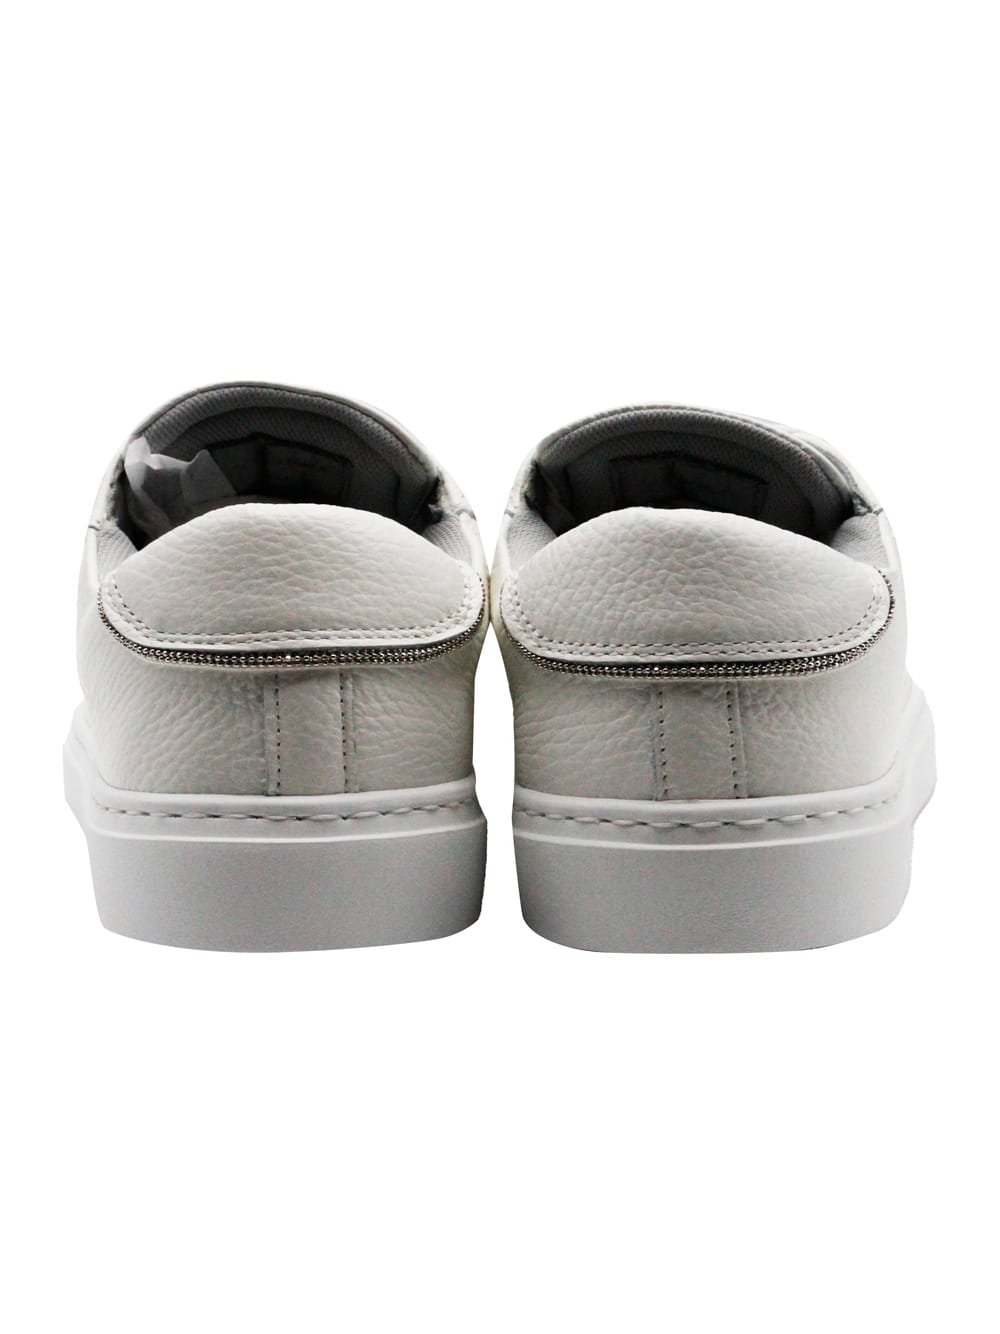 Shop Fabiana Filippi Sneakers In Soft Textured Leather With Rows Of Monili On The Back. Lace Closure In White